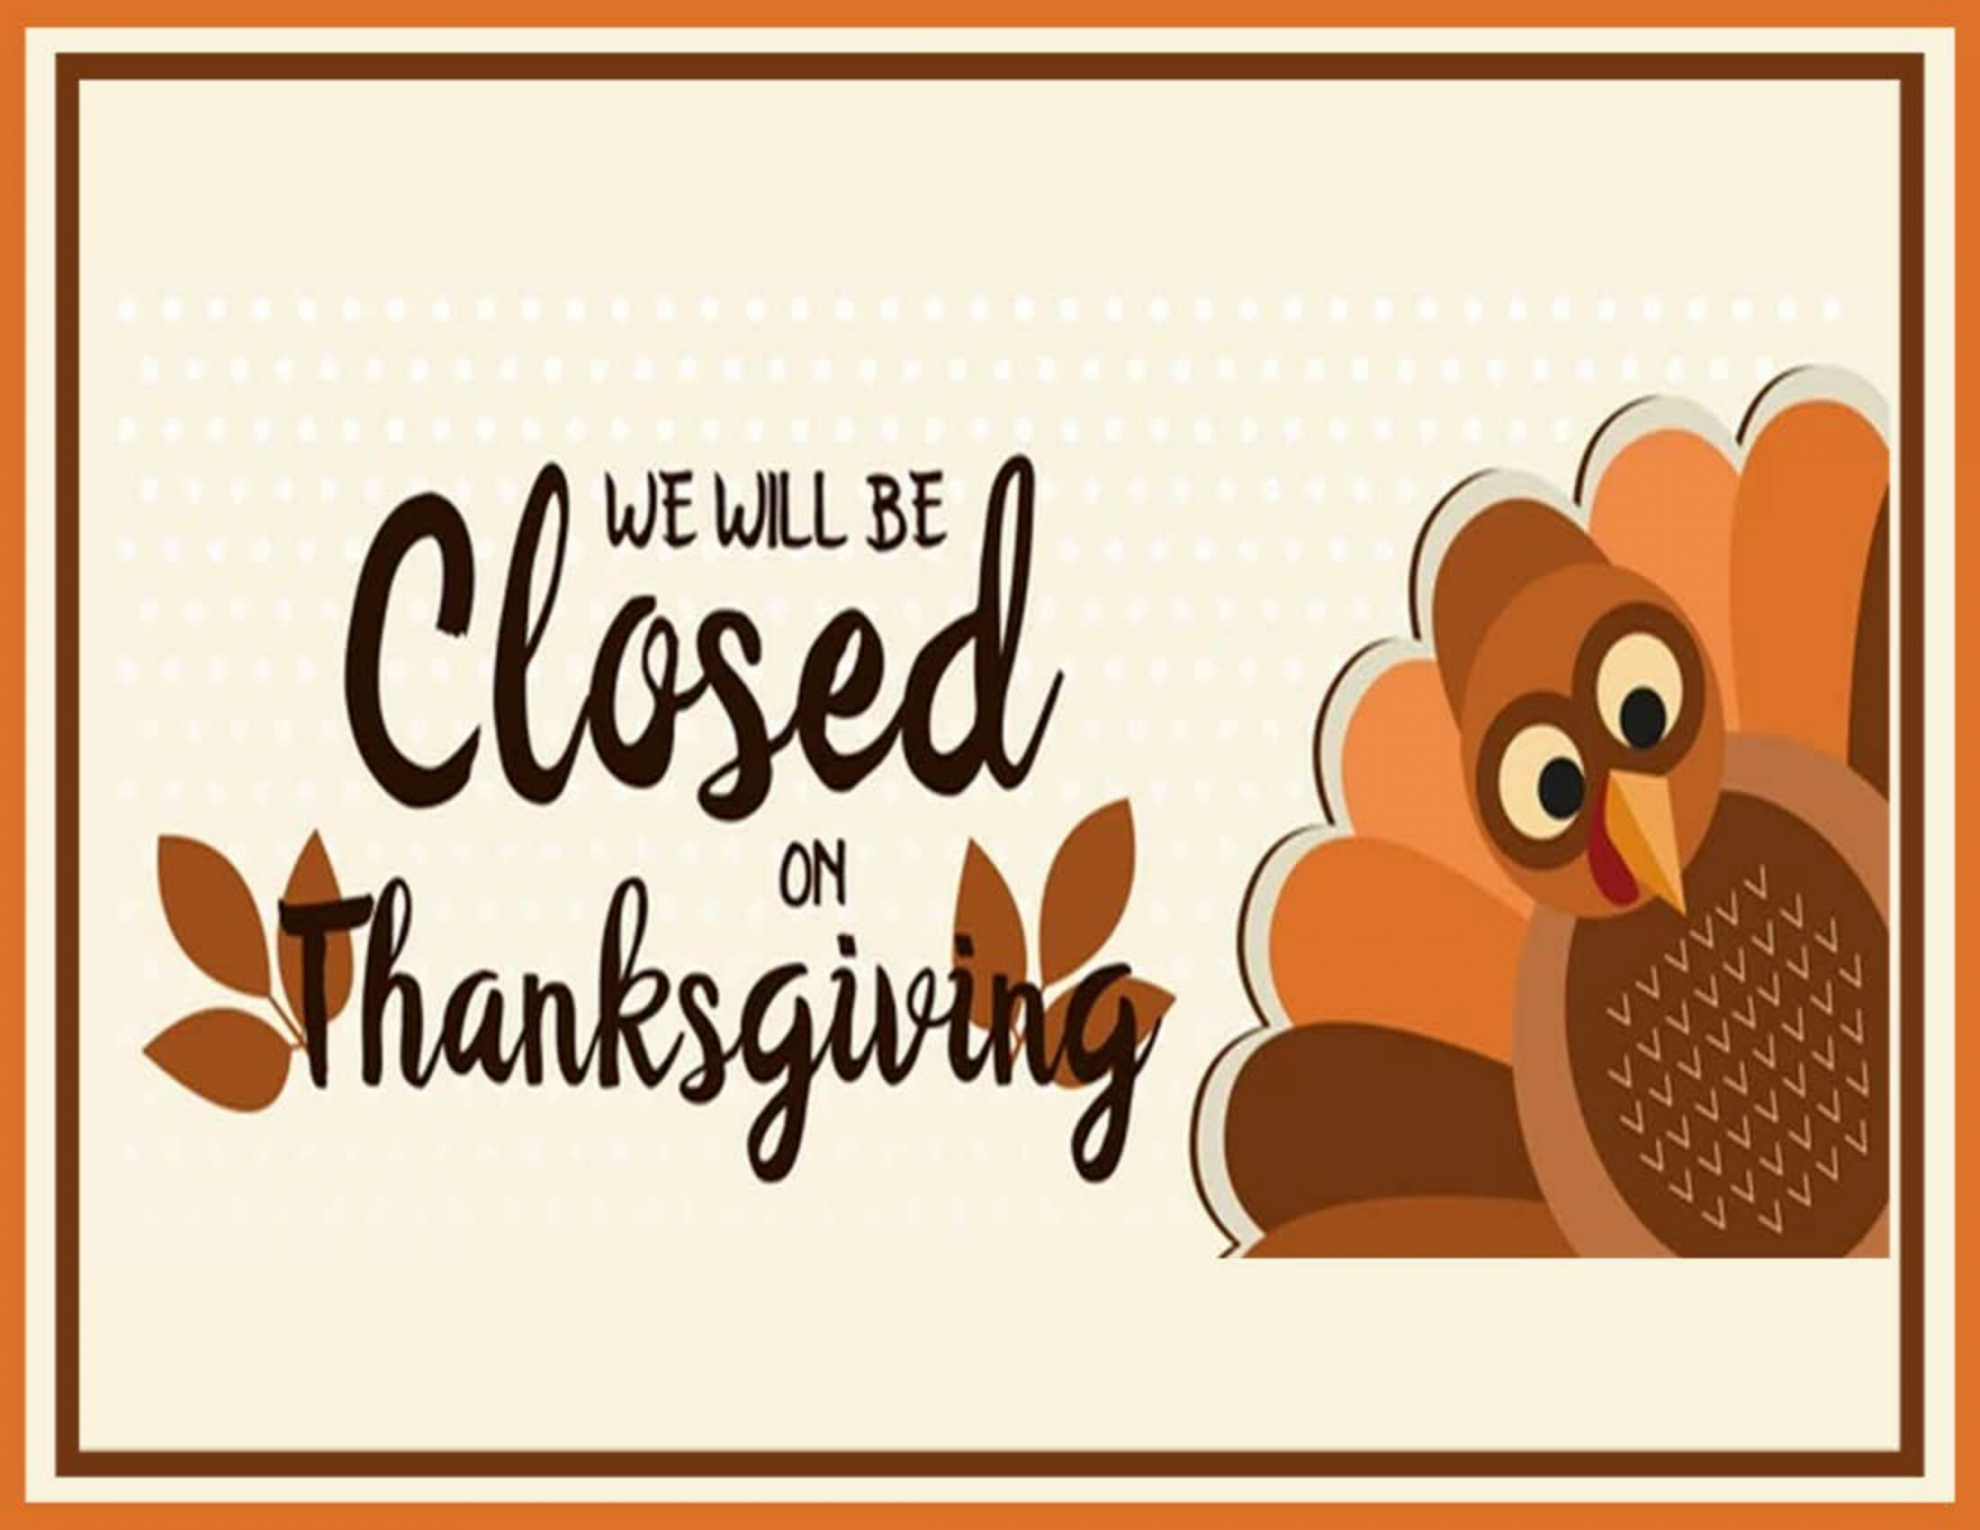 Closed For thanksgiving signs  FREE Download - FREE Printables - Free Printable Closed For Thanksgiving Signs